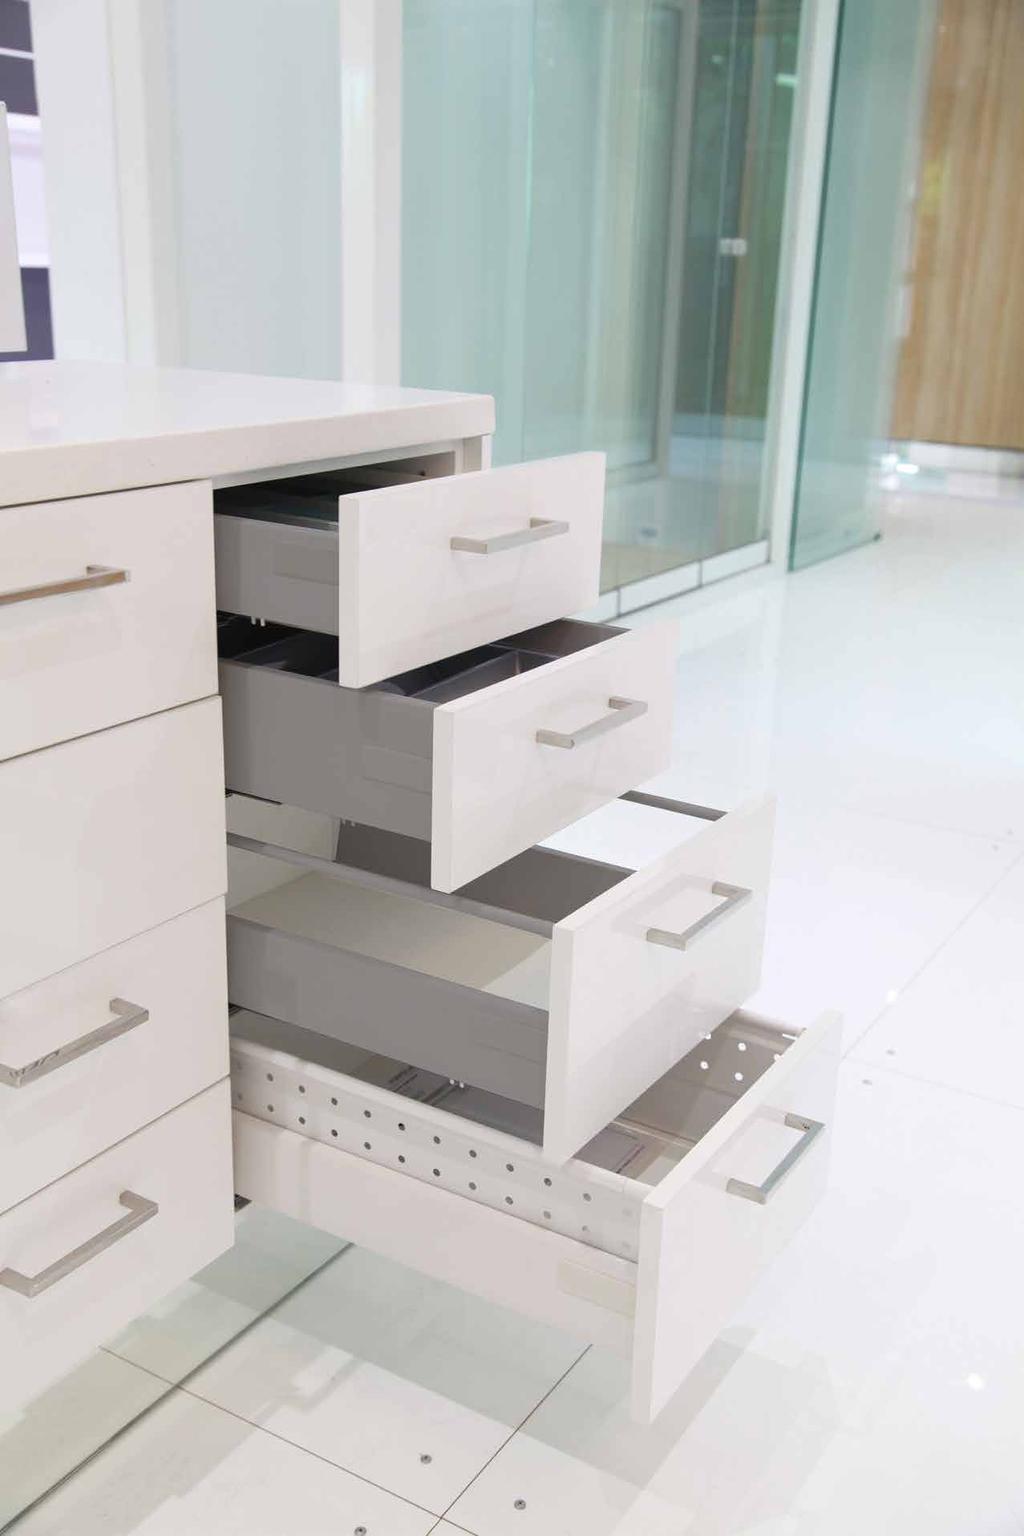 BASE CABINET WITH 4 DRAWERS 450 MM ALTO DRAWER BASE CABINET WITH 4 DRAWERS 450 MM MX DRAWER 01 Solid back set in 4 mm x Depth 450 720 x 560 561.00.